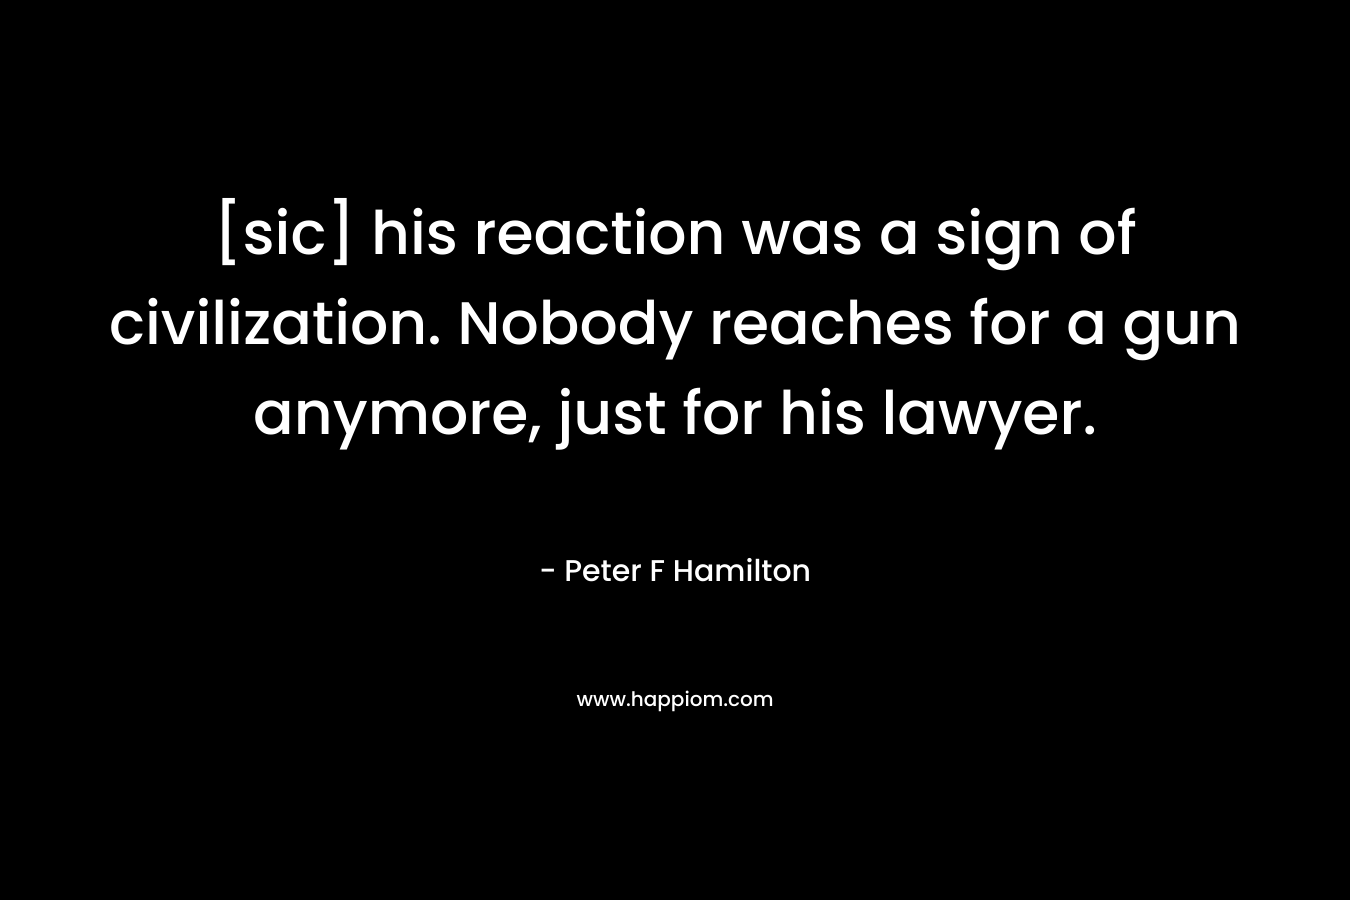 [sic] his reaction was a sign of civilization. Nobody reaches for a gun anymore, just for his lawyer. – Peter F Hamilton